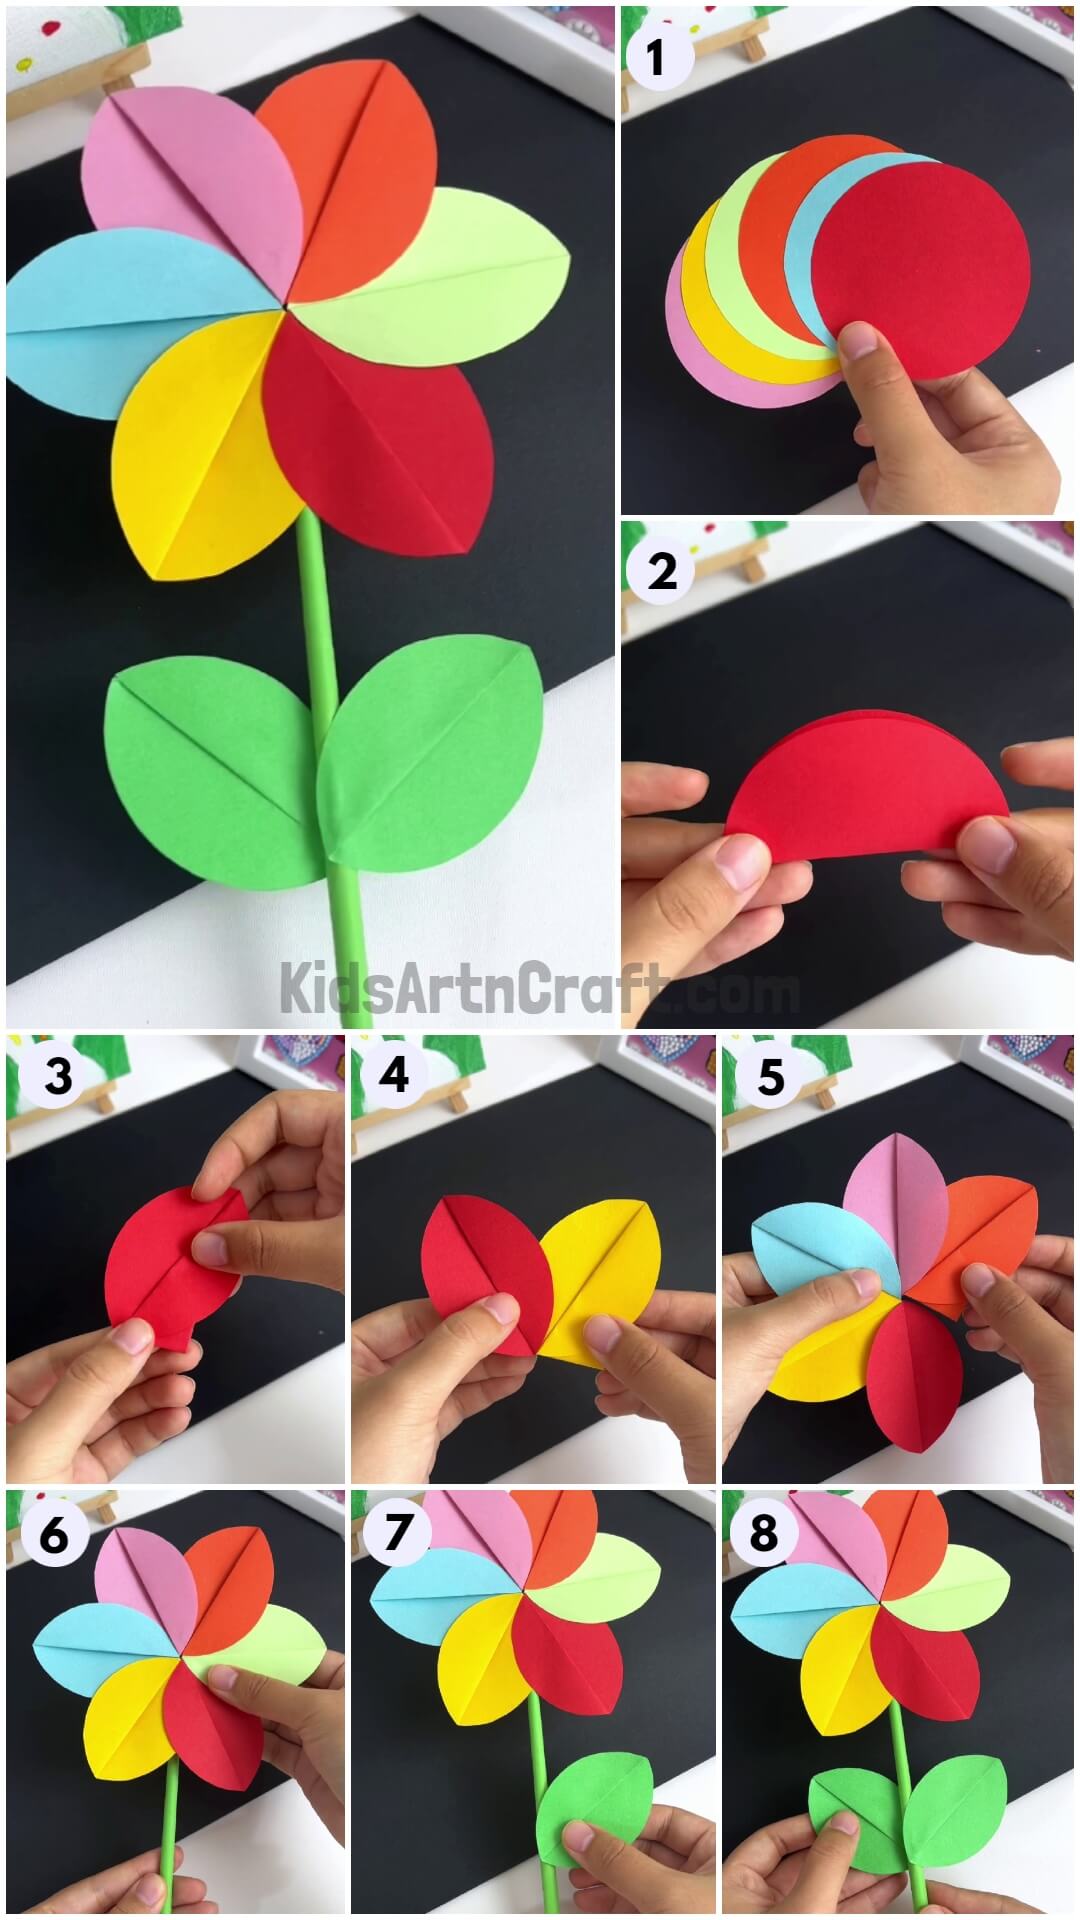 Colorful Pin Wheel-shaped Flower Craft Making Idea For Beginners